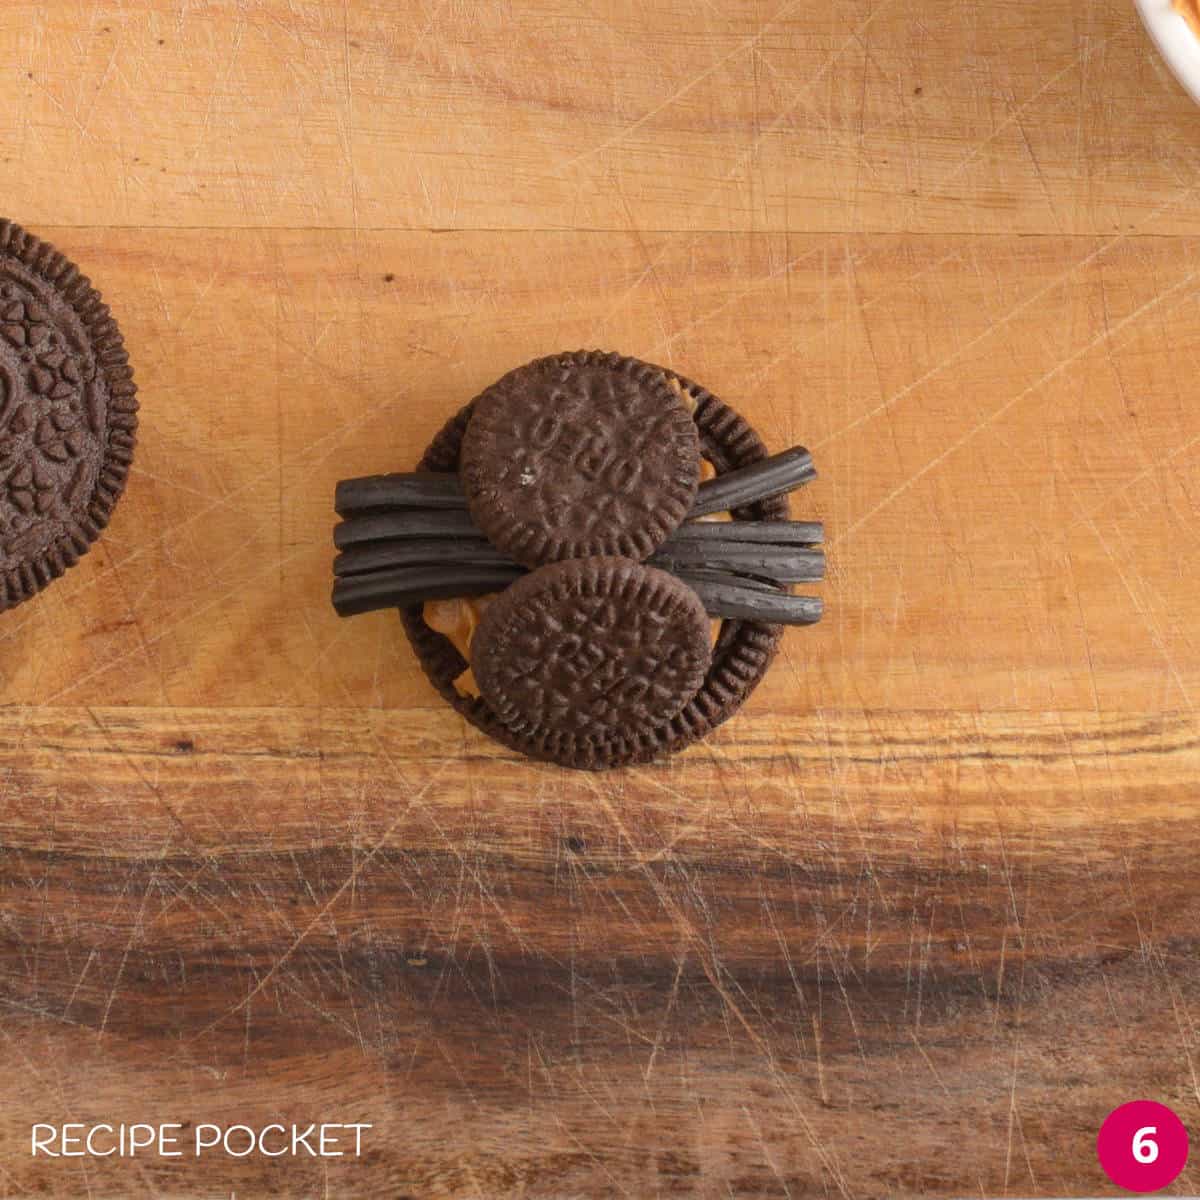 Two halves of mini oreo cookies form a spider body on top of a regular oreo cookie.